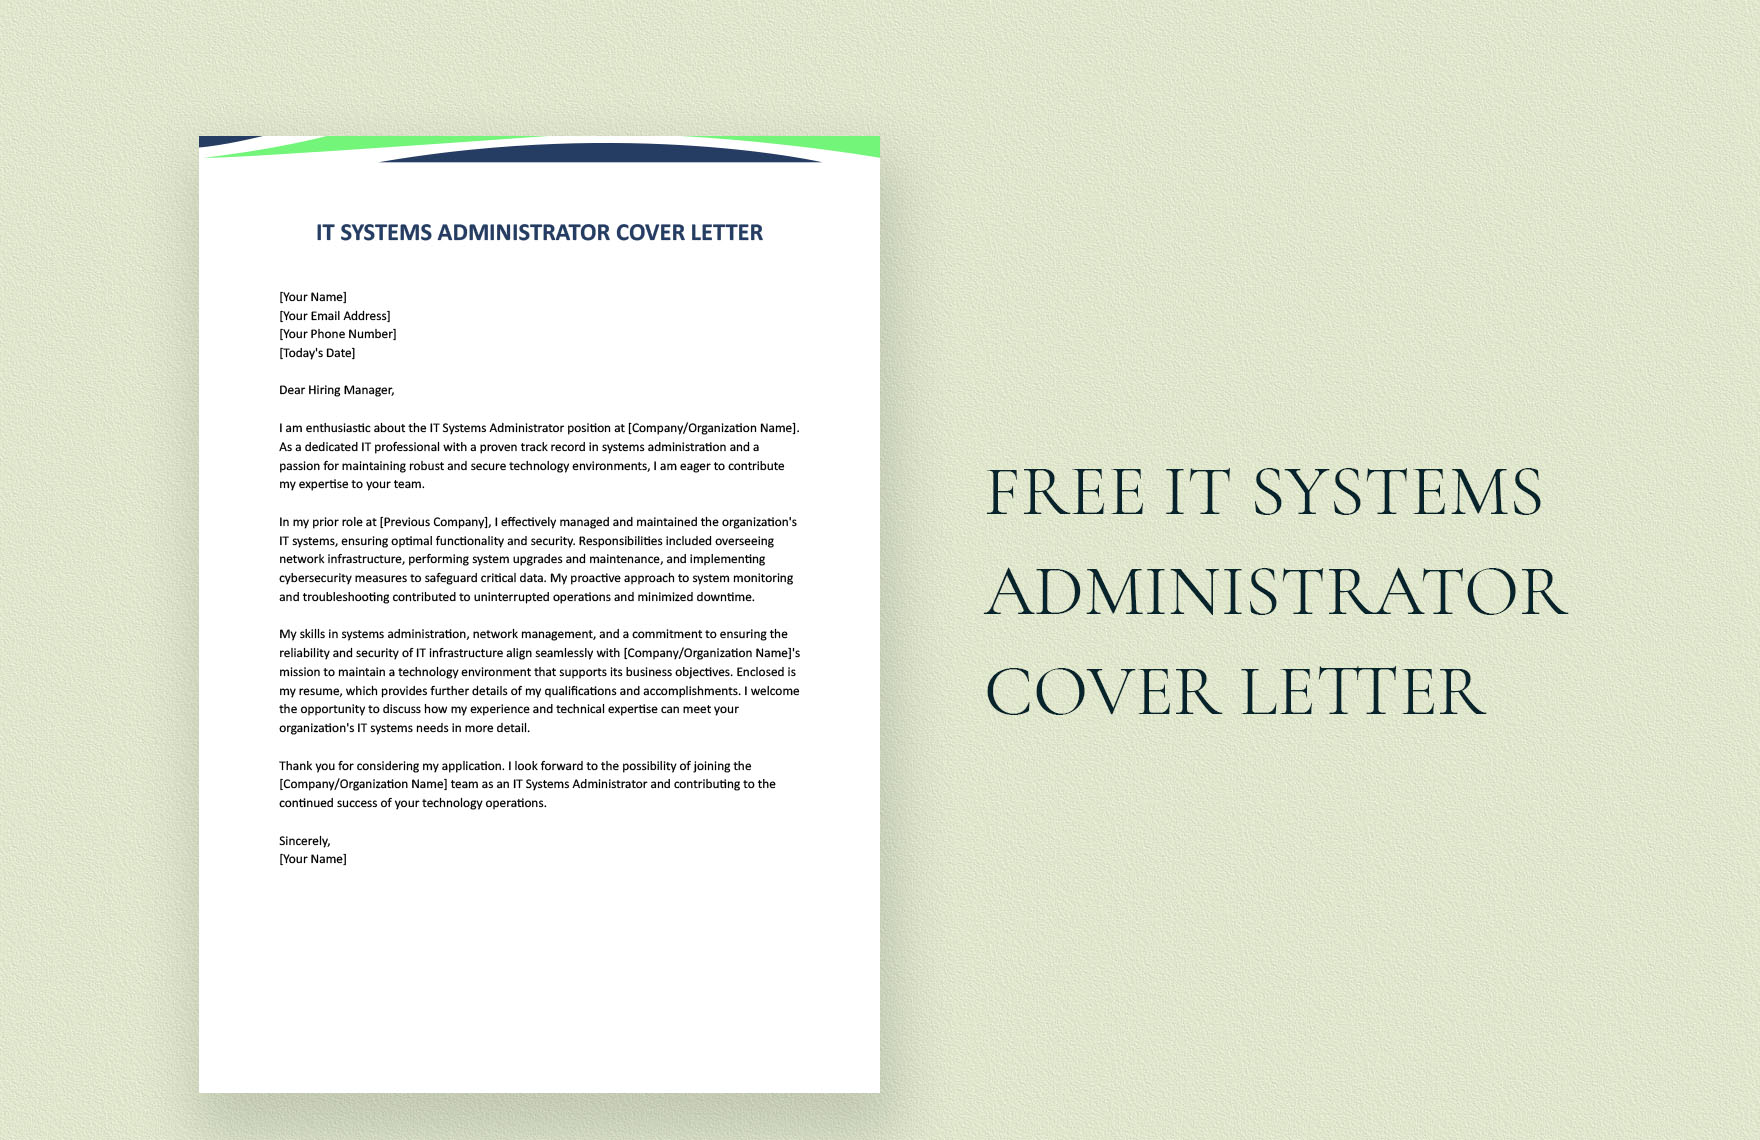 IT Systems Administrator Cover Letter